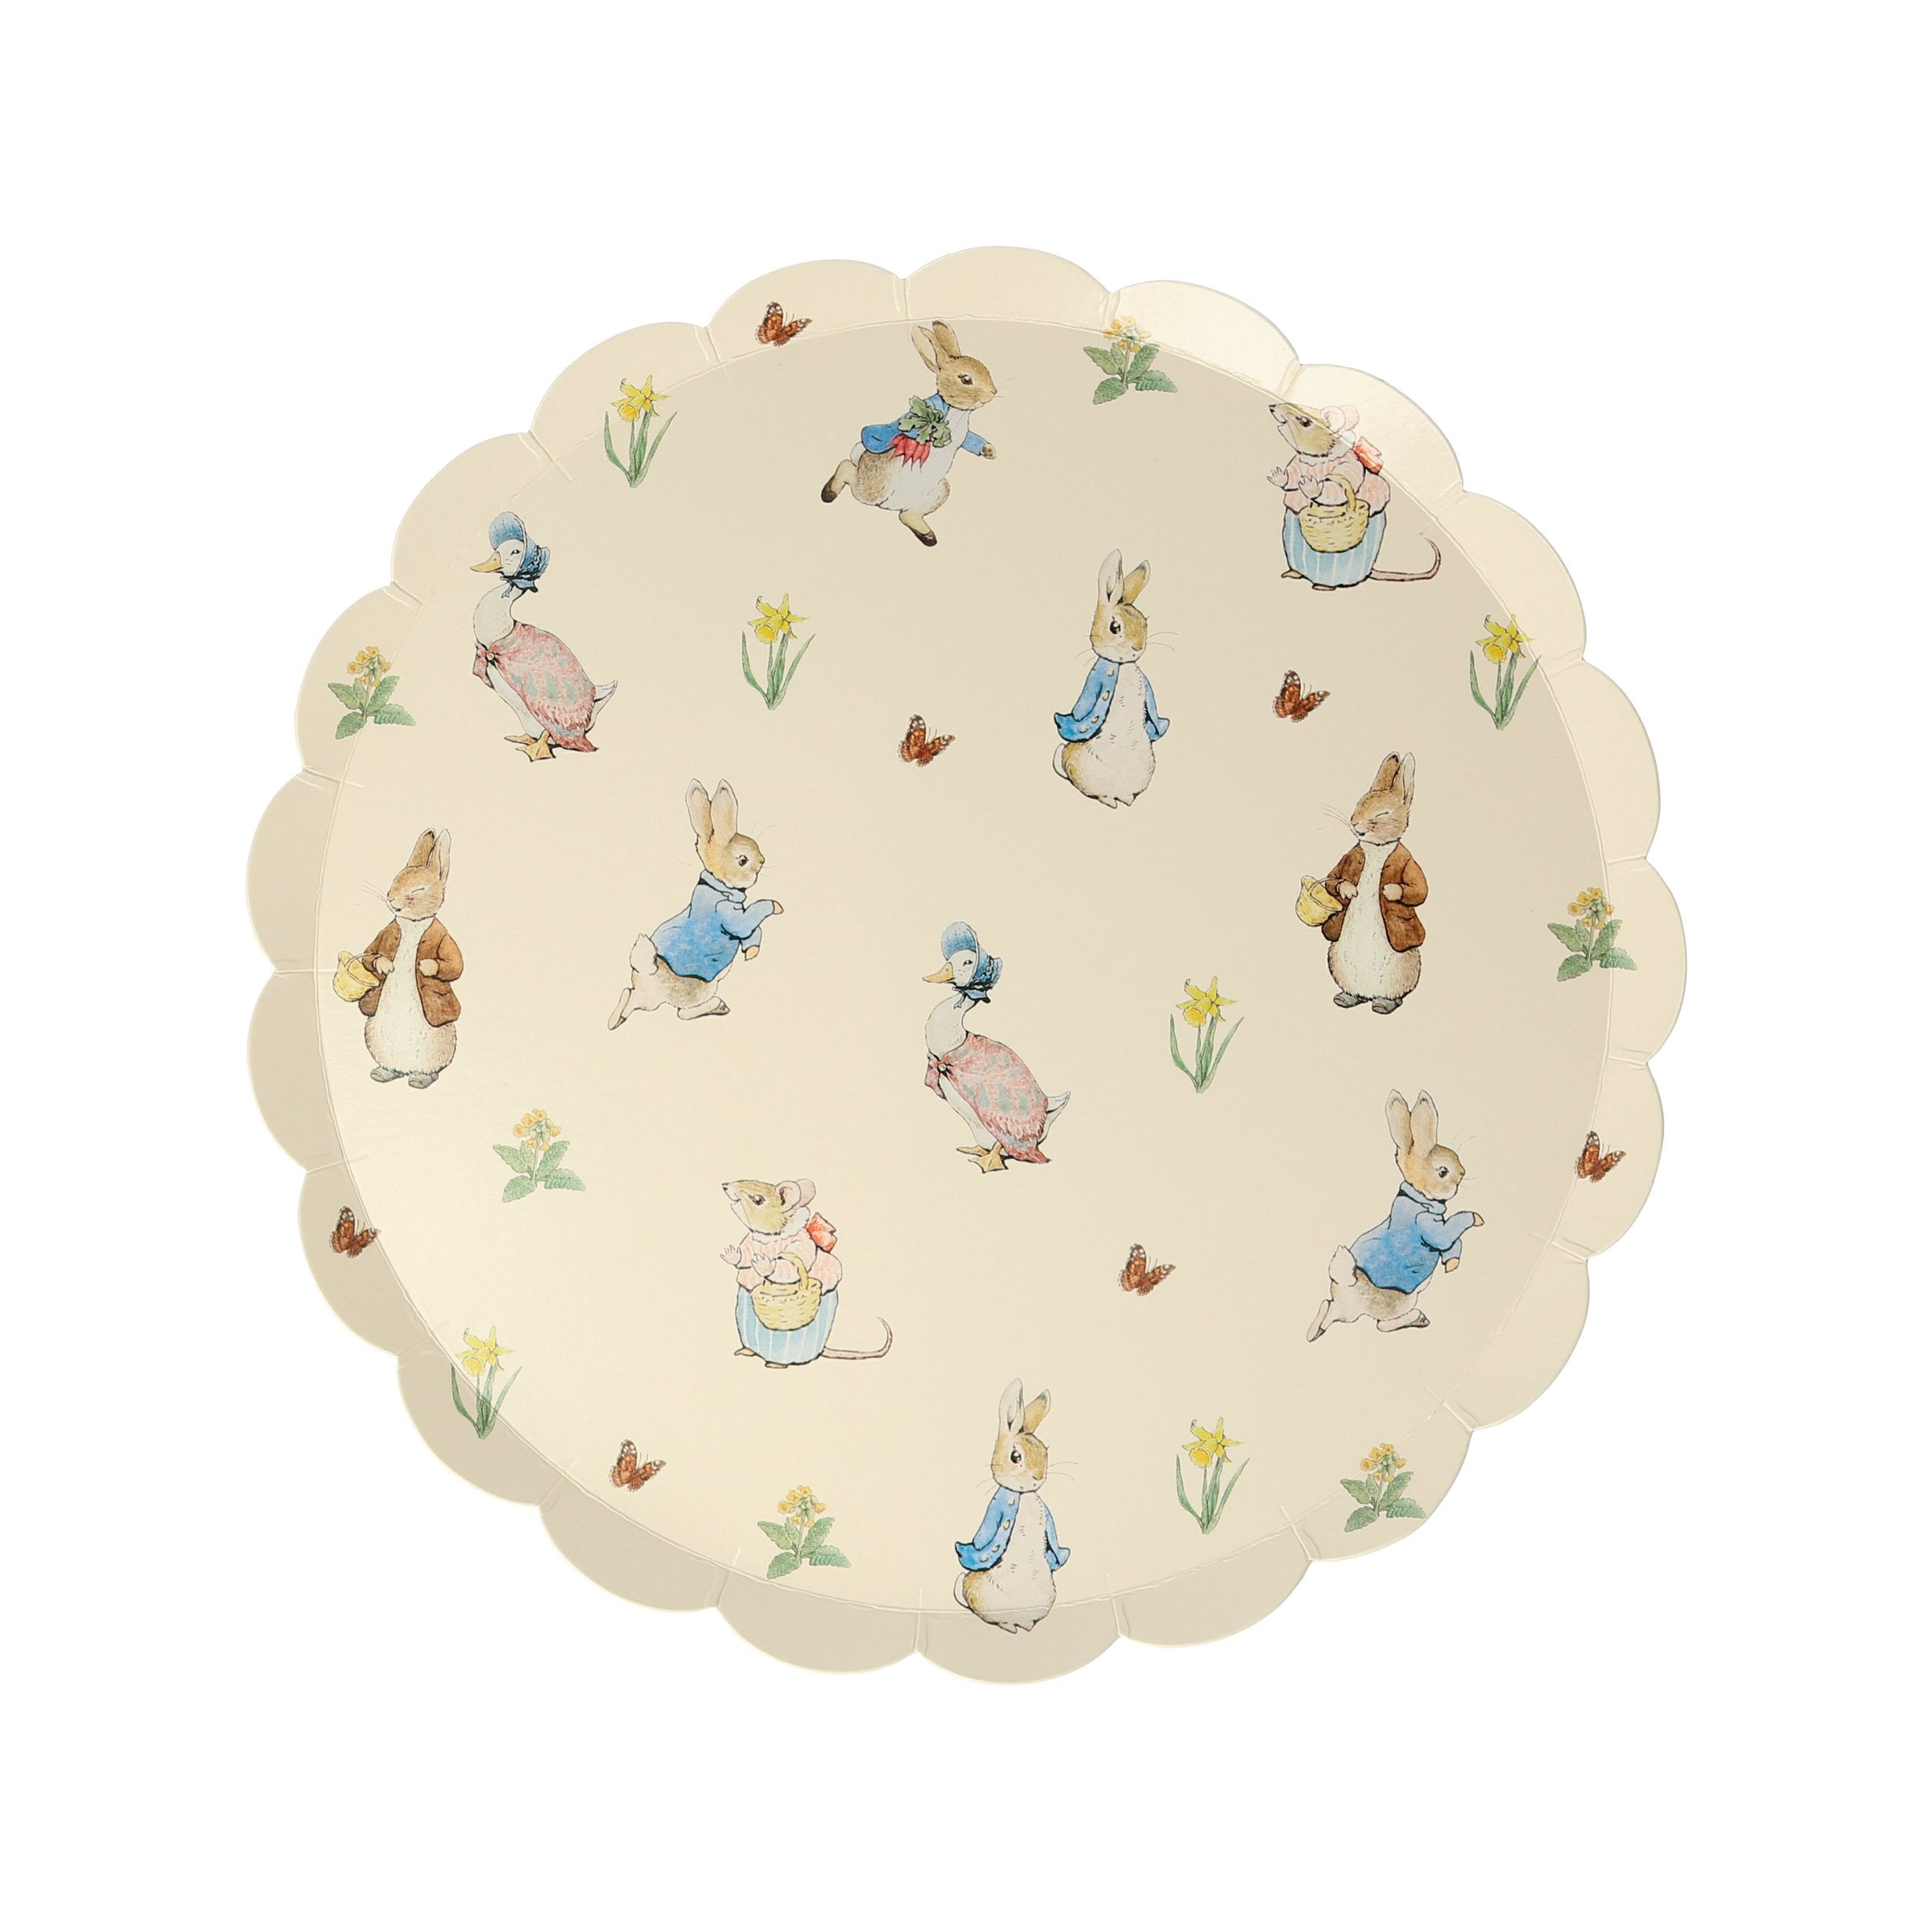 These charming plates feature Peter Rabbit and friends, with a stylish scallop edge.